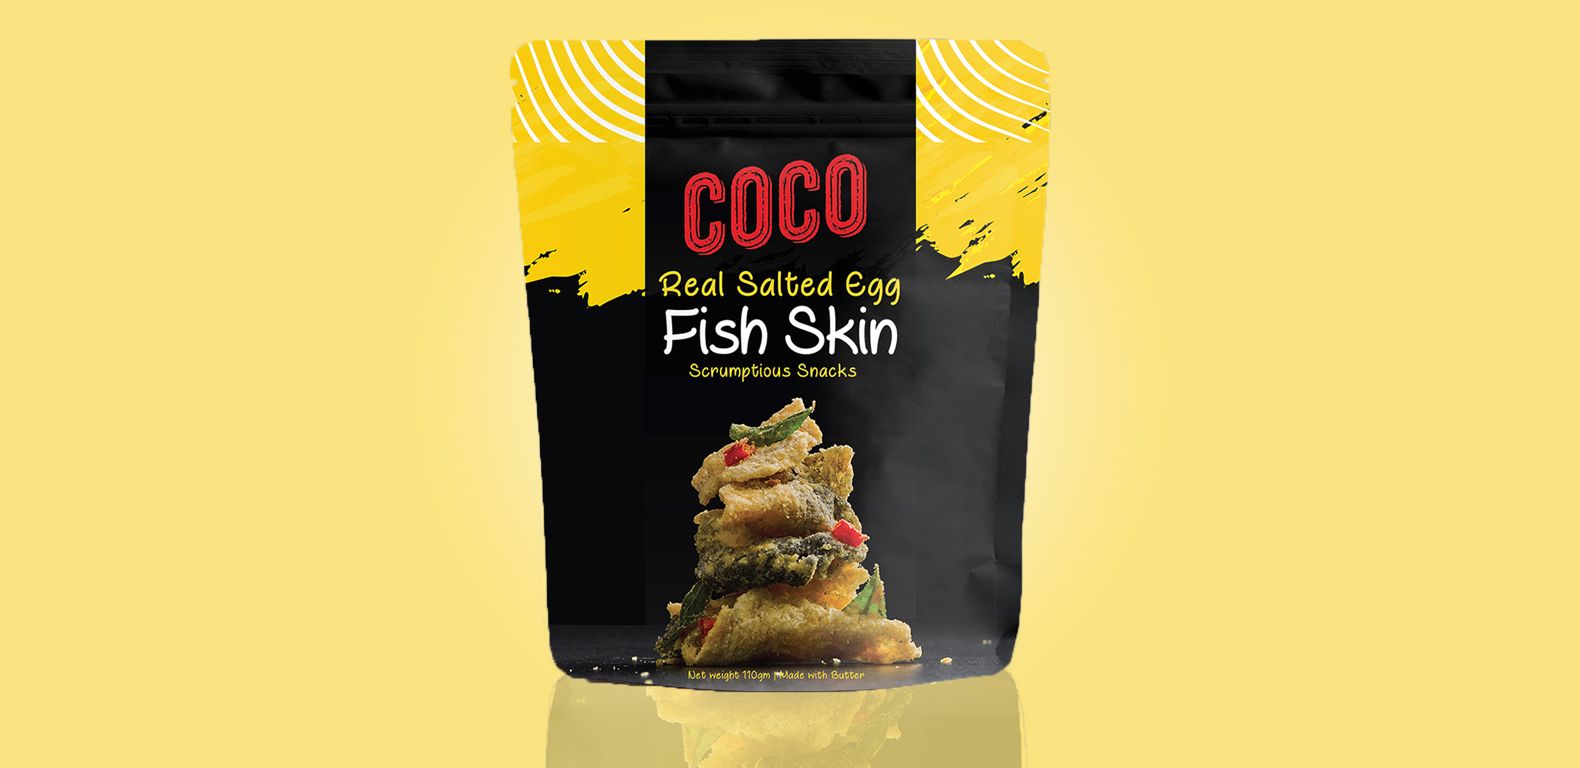 Packaging-Design-Coco-Salted-Fish-Skin-front-